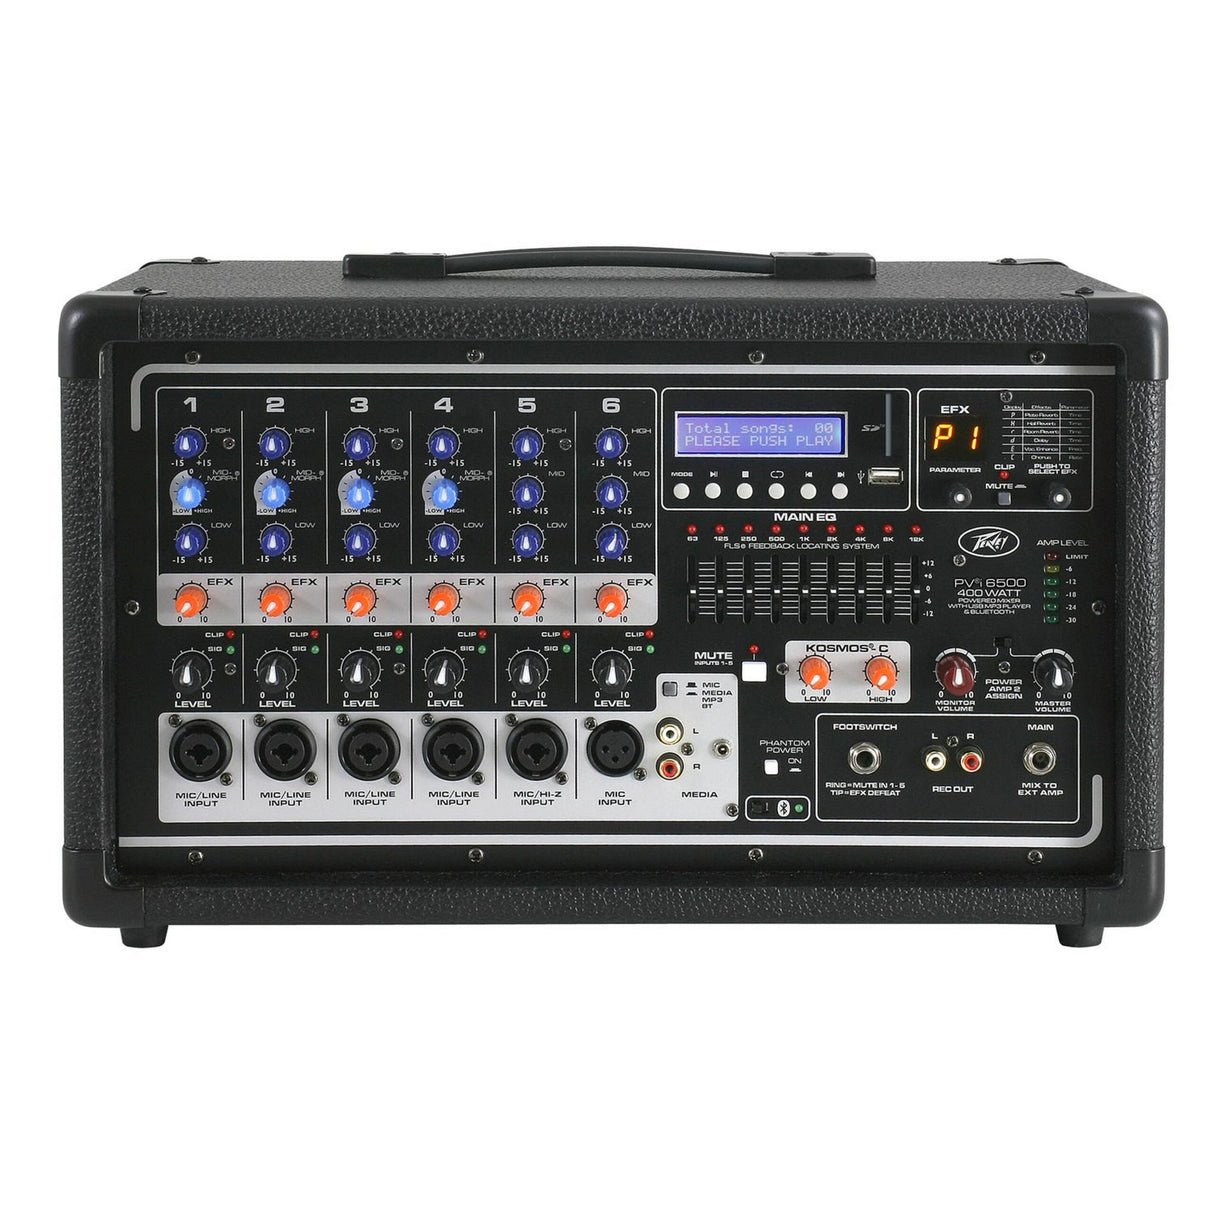 Peavey PVi 6500 All-in-One Powered Mixer